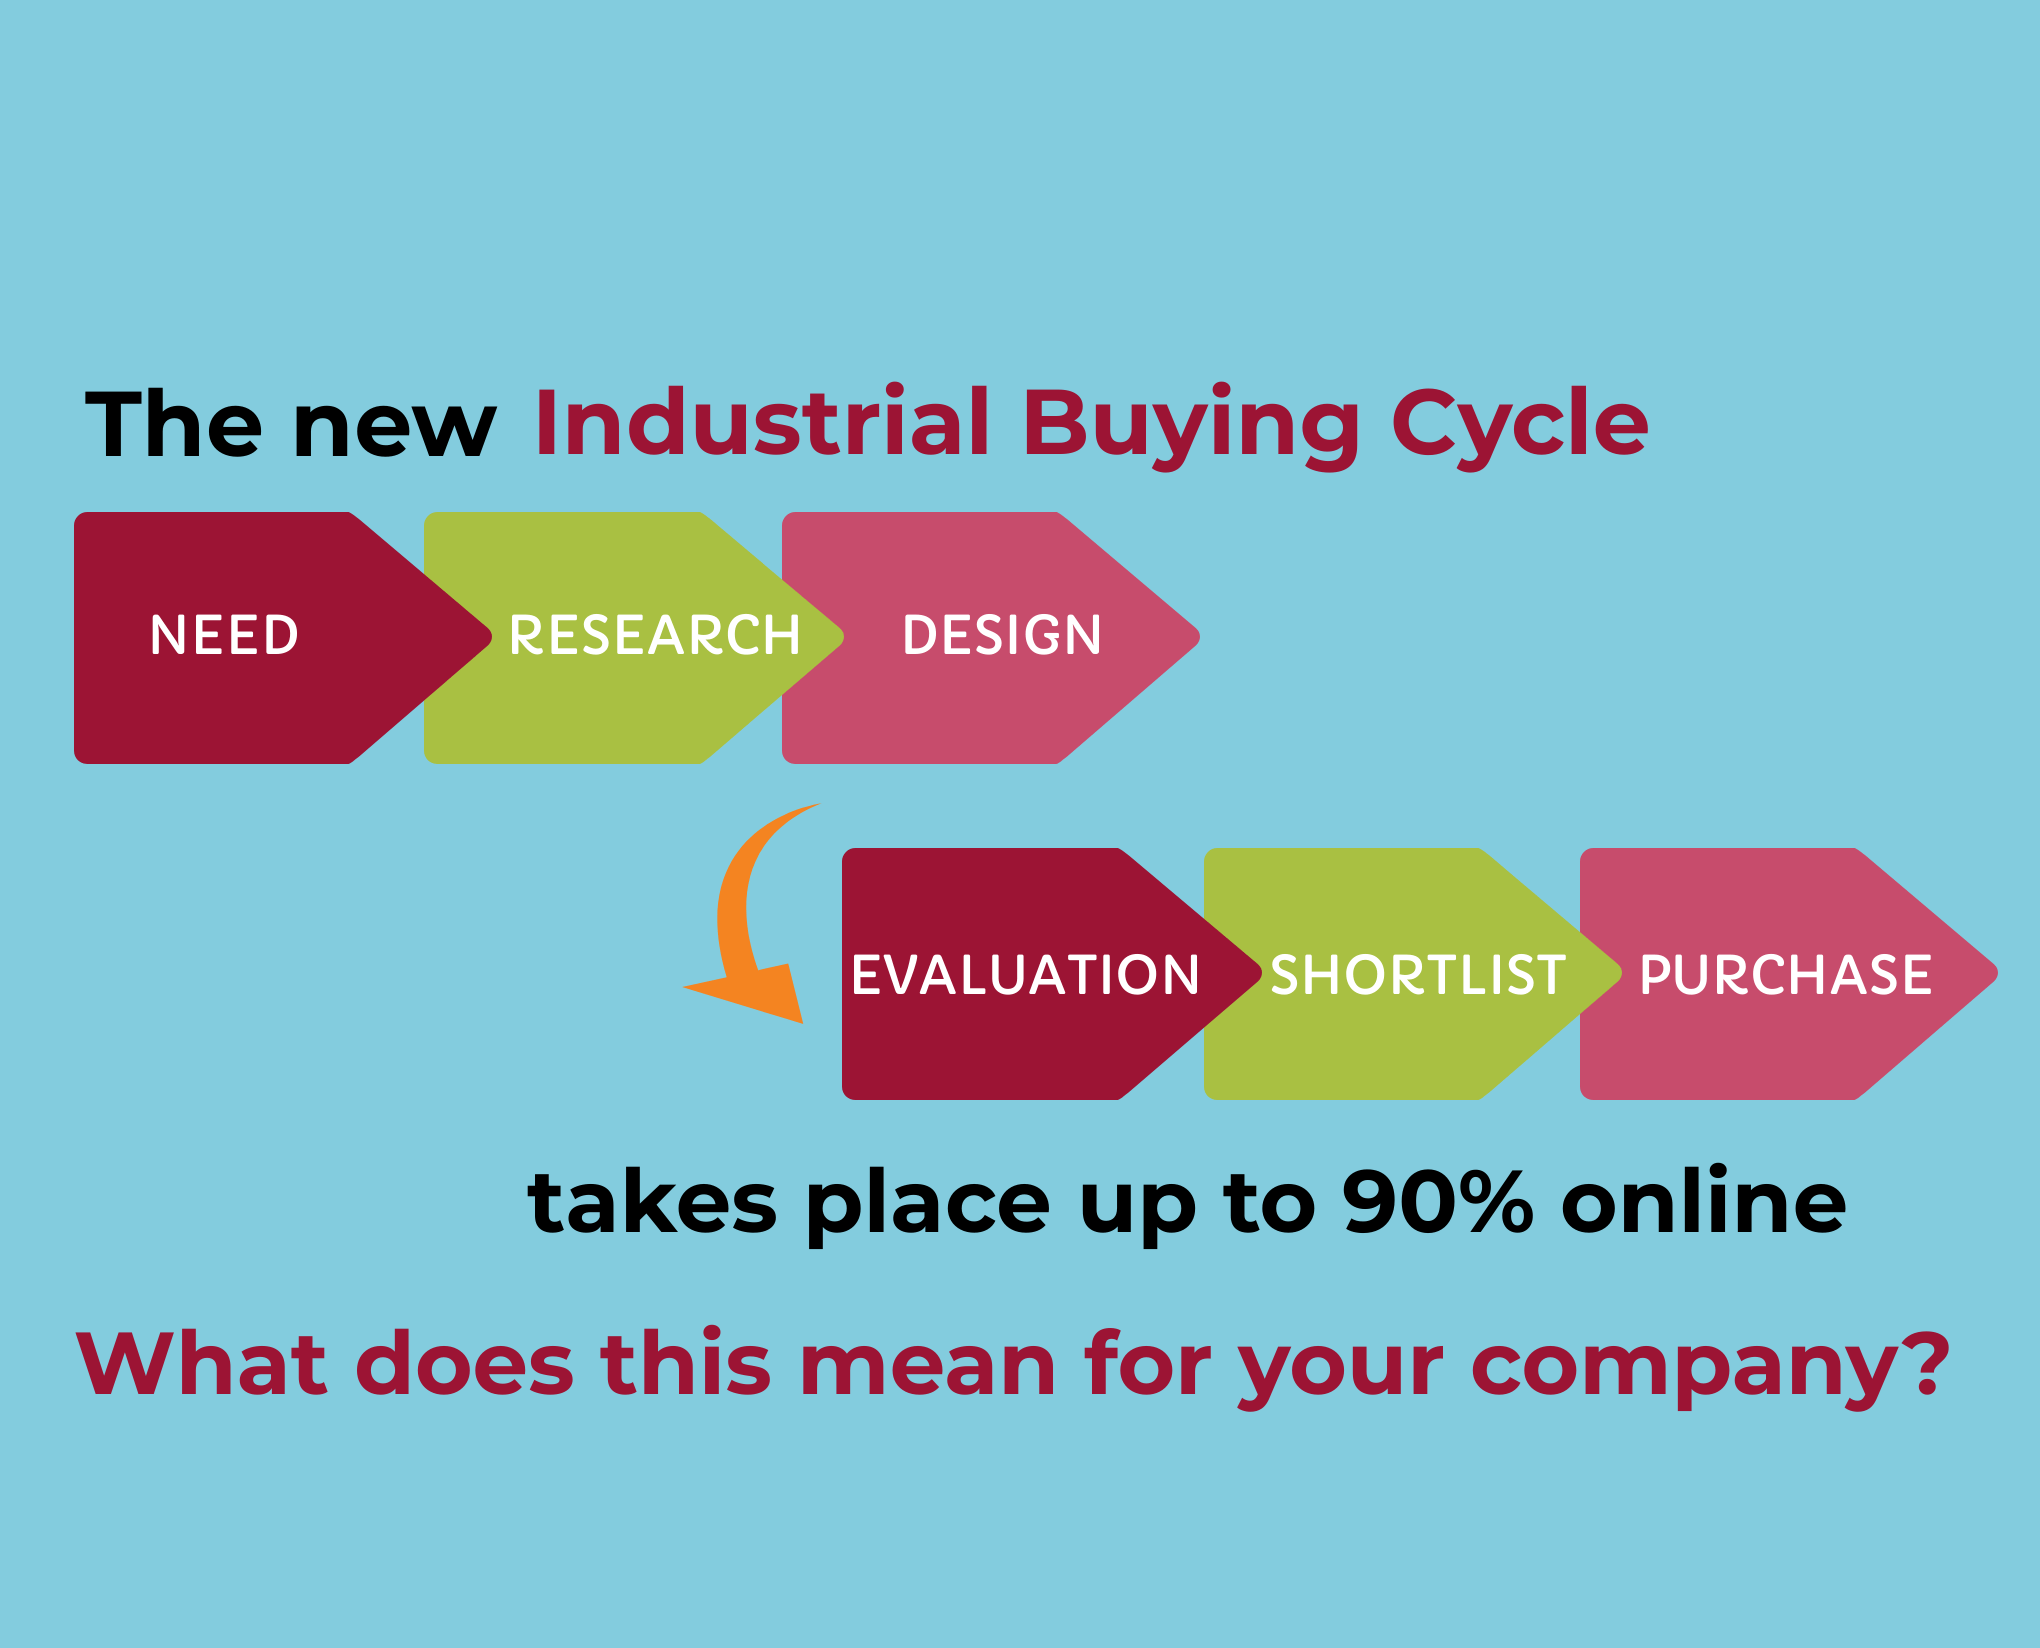 shows the steps in the B2B buyers journey - need - research - design - evaluation - shortlist - purchase